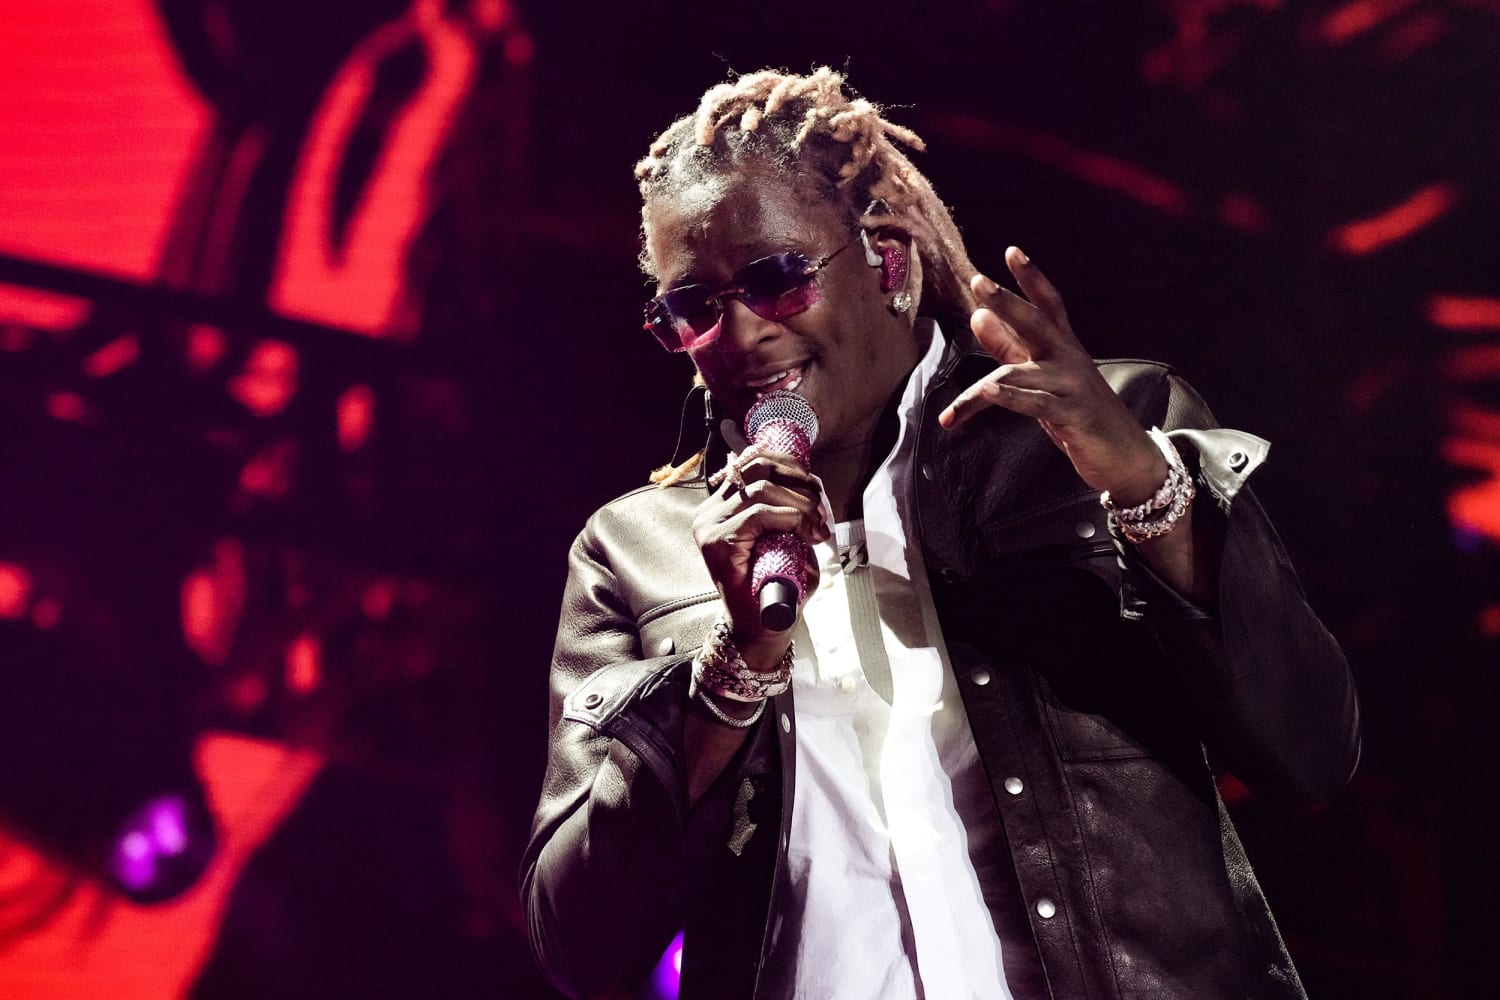 Young Thug and co-defendant made hand-to-hand drug exchange in court, prosecutors say